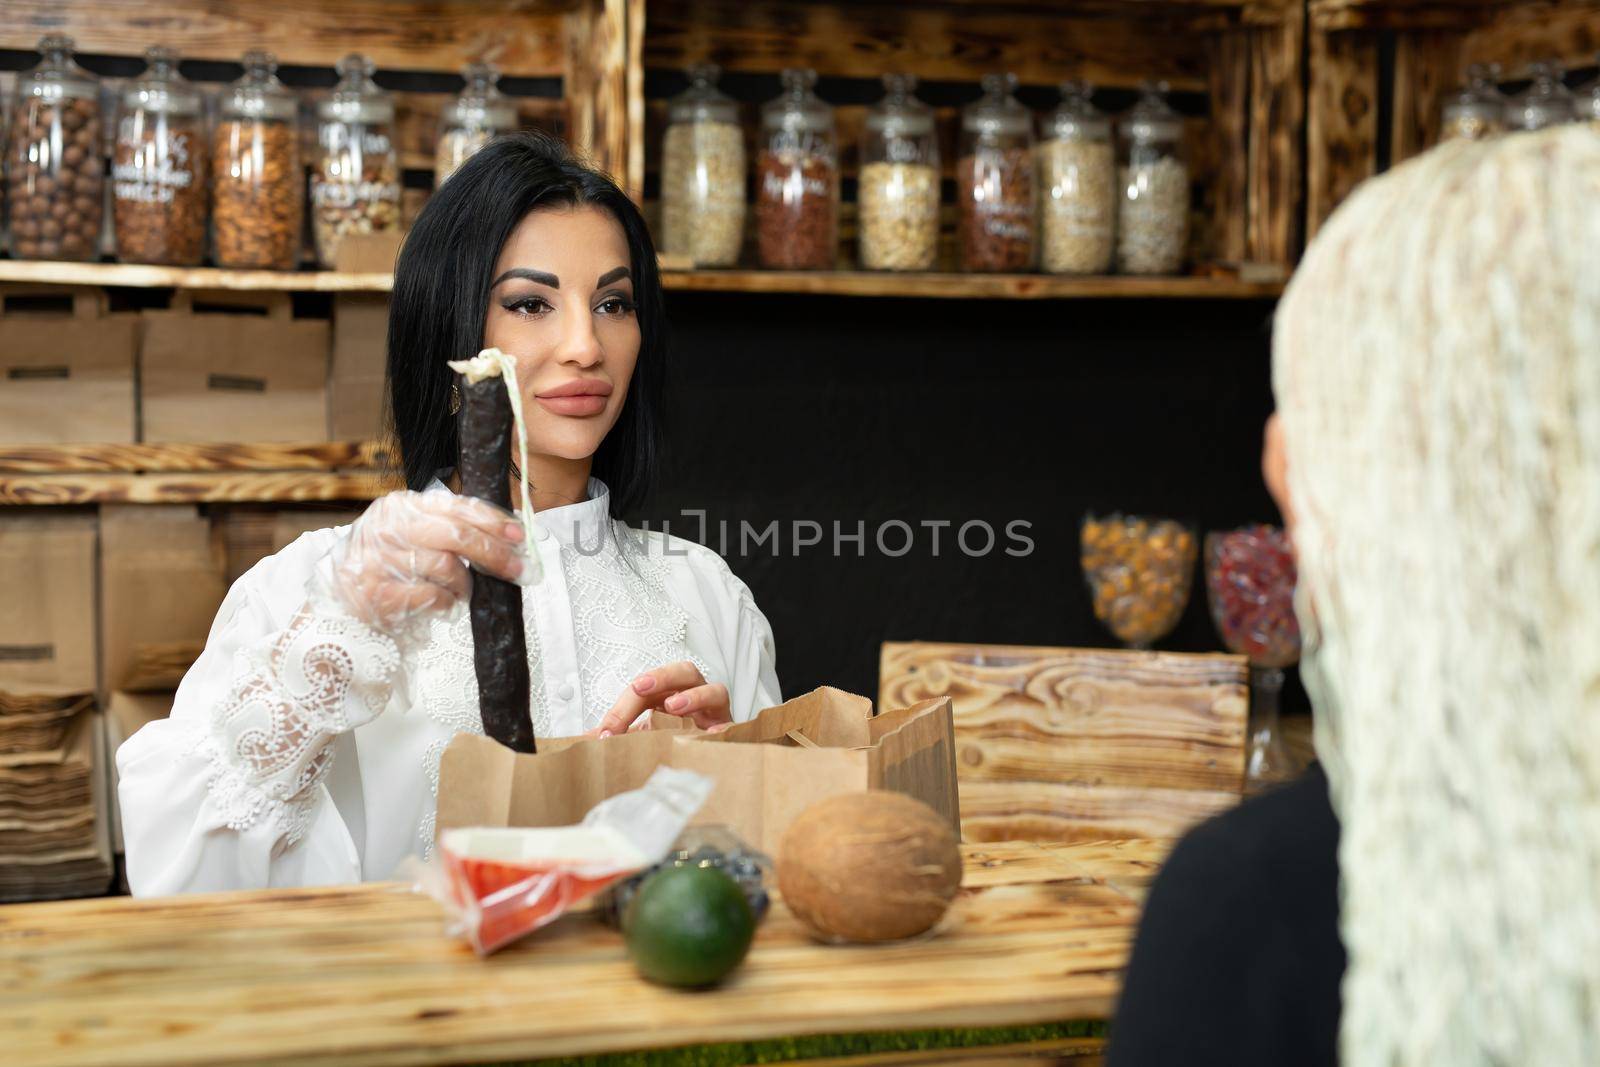 Saleswoman packs a shopping bag with goods in a health food store.